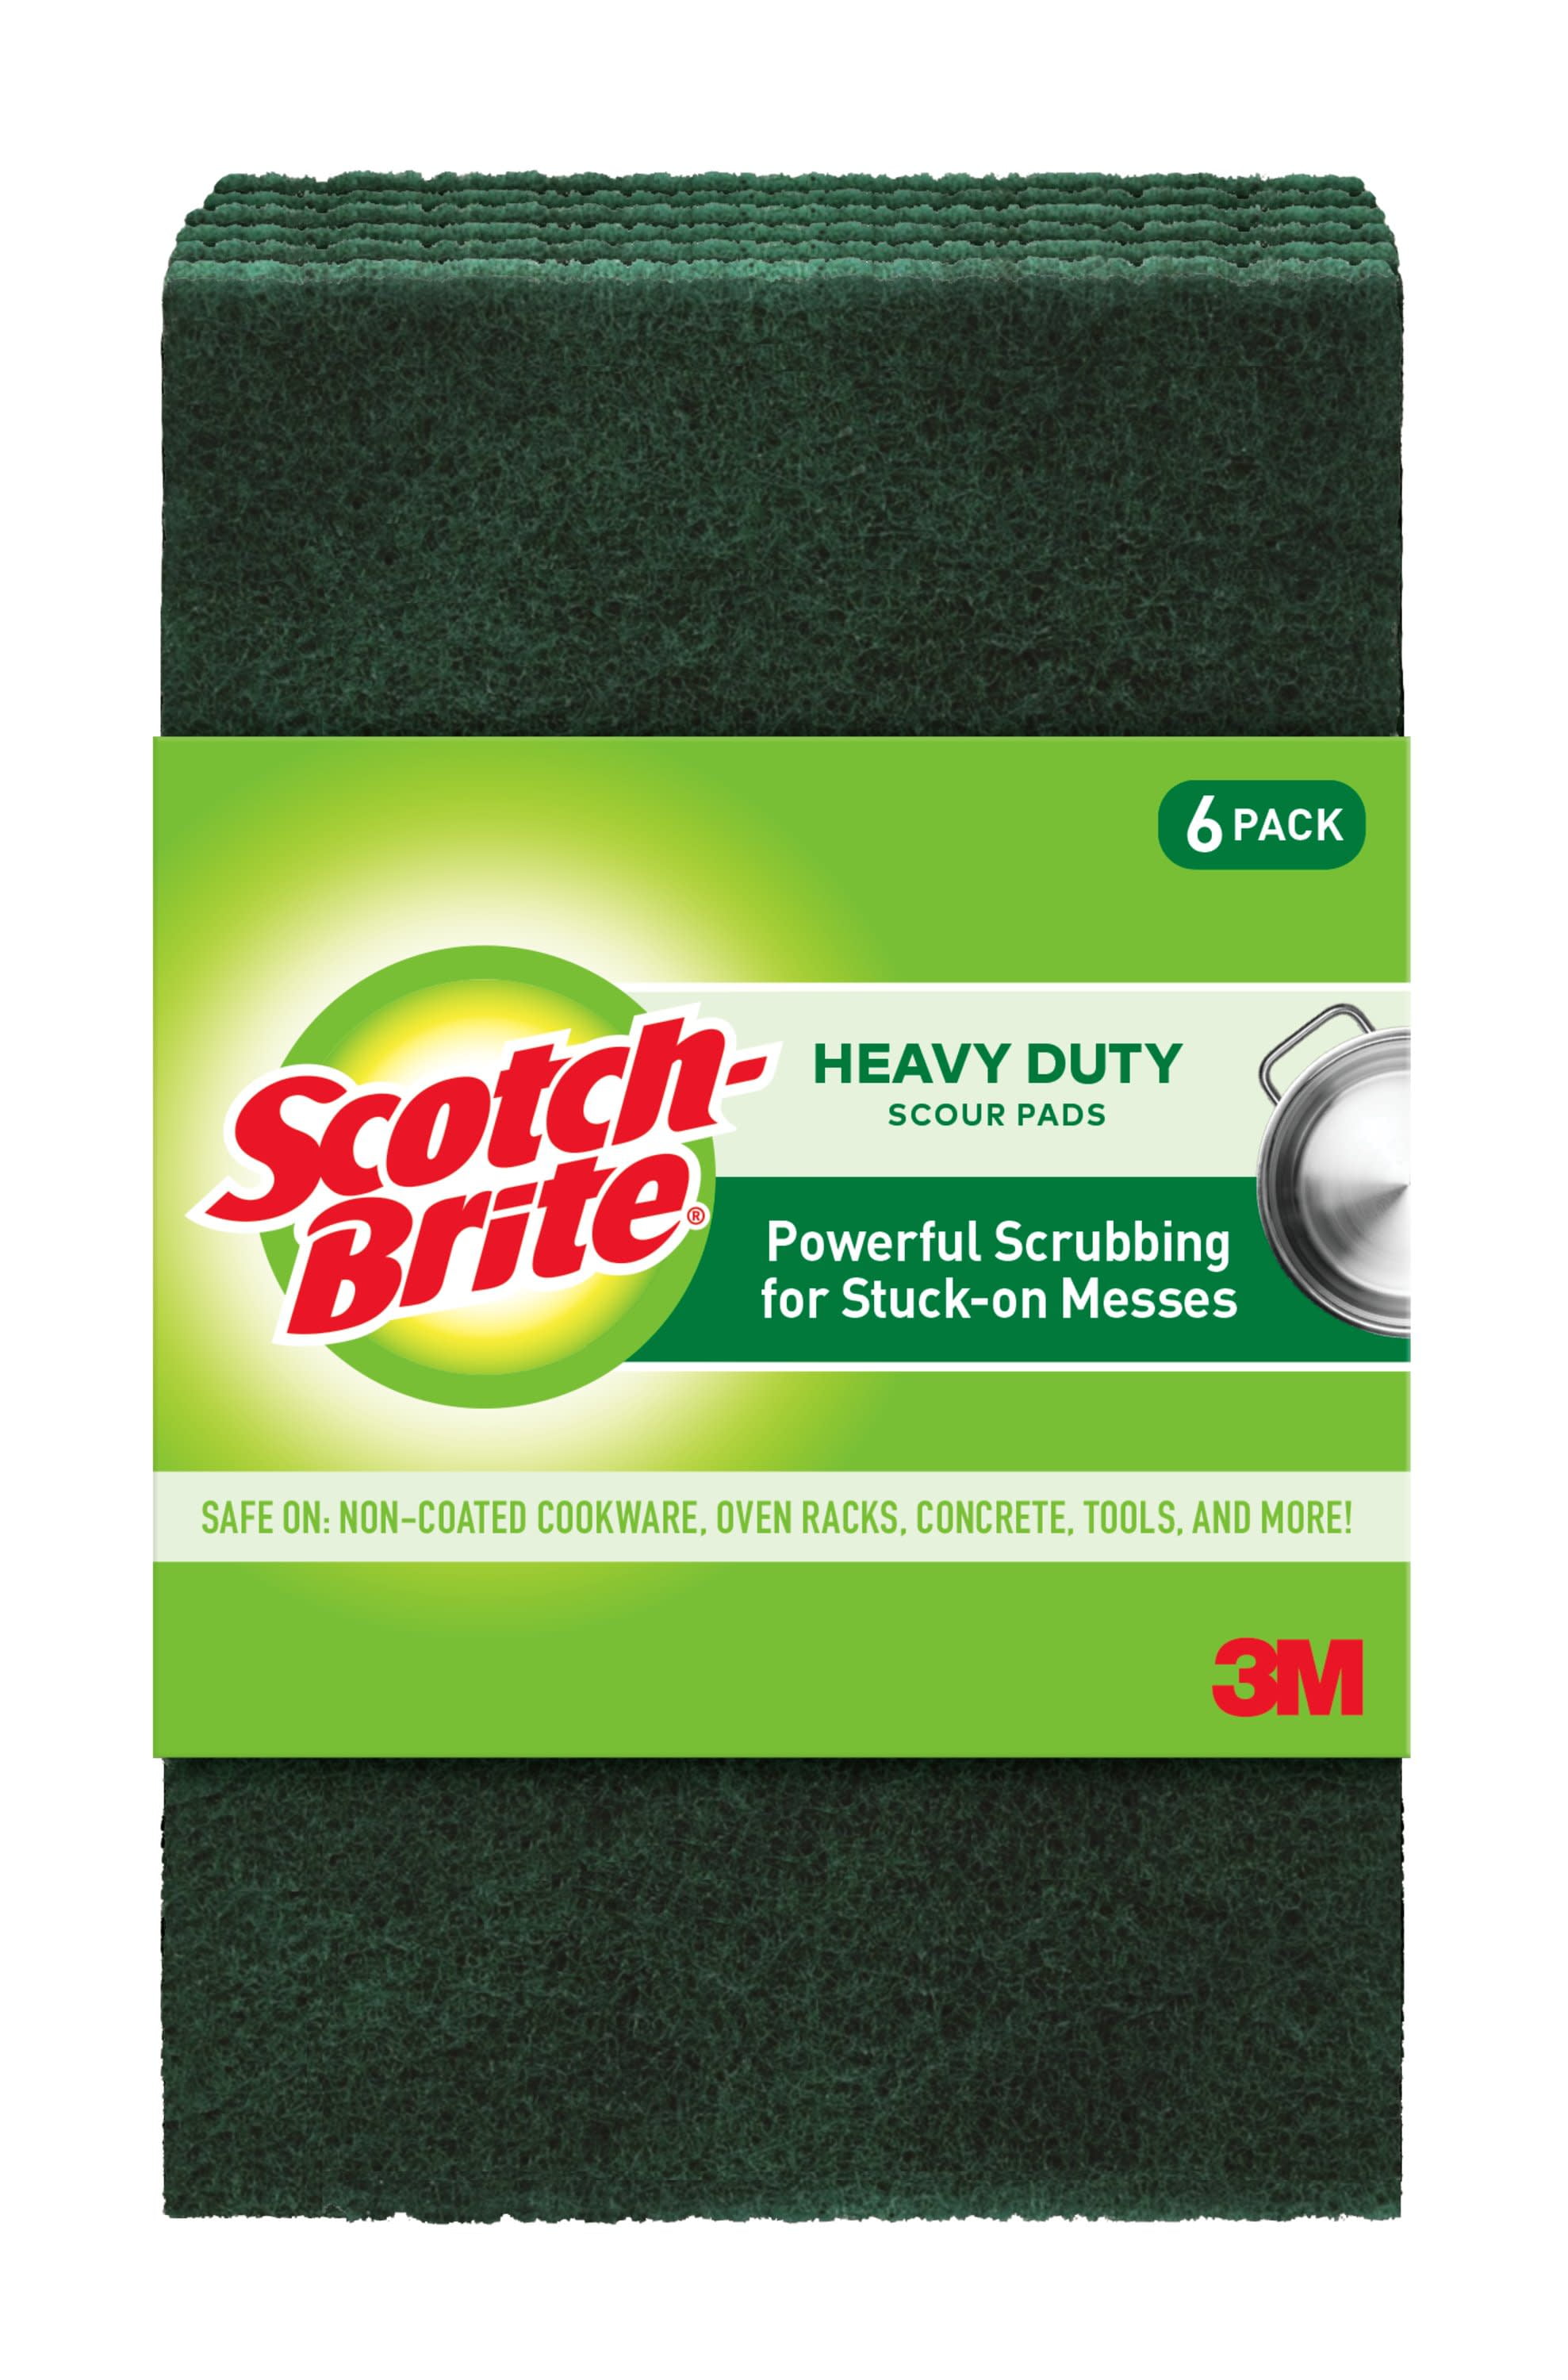 Scotch-Brite Bathroom Buildup Remover 2-Pack 2-Count Pads Multipurpose  Bathroom Cleaner in the Multipurpose Bathroom Cleaners department at